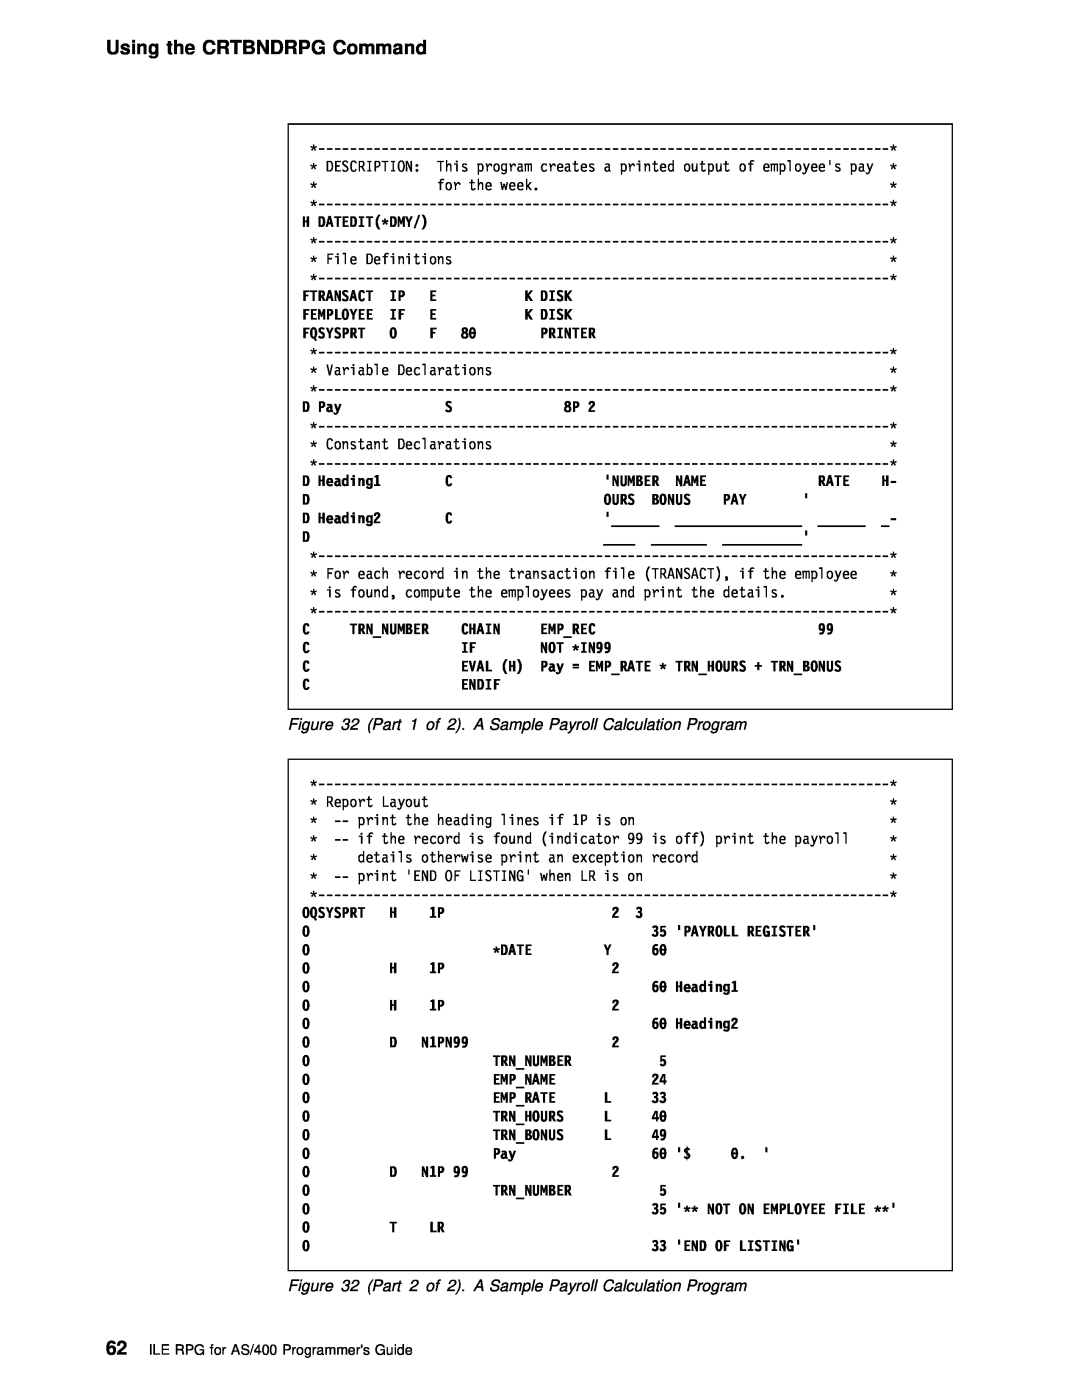 IBM manual Using the CRTBNDRPG Command, Part, A Sample Payroll Calculation Program, ILE RPG for AS/400 Programmers Guide 